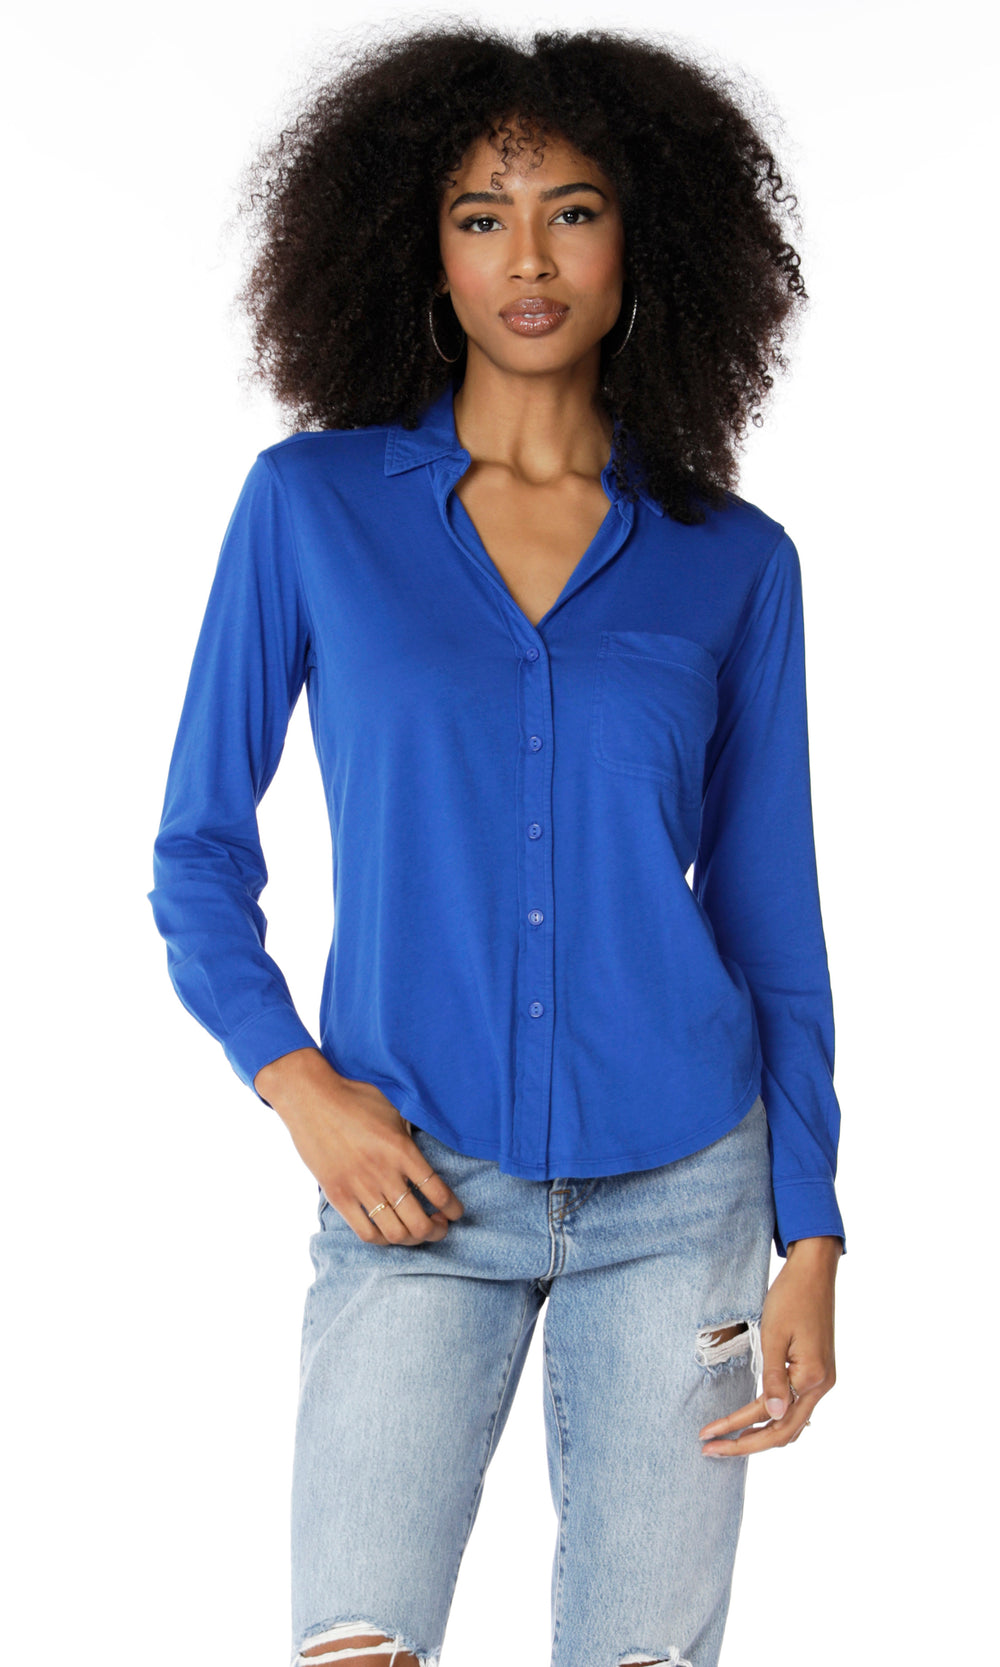 Long sleeve blue button down knit tee with collar - Tru Bue Boutique